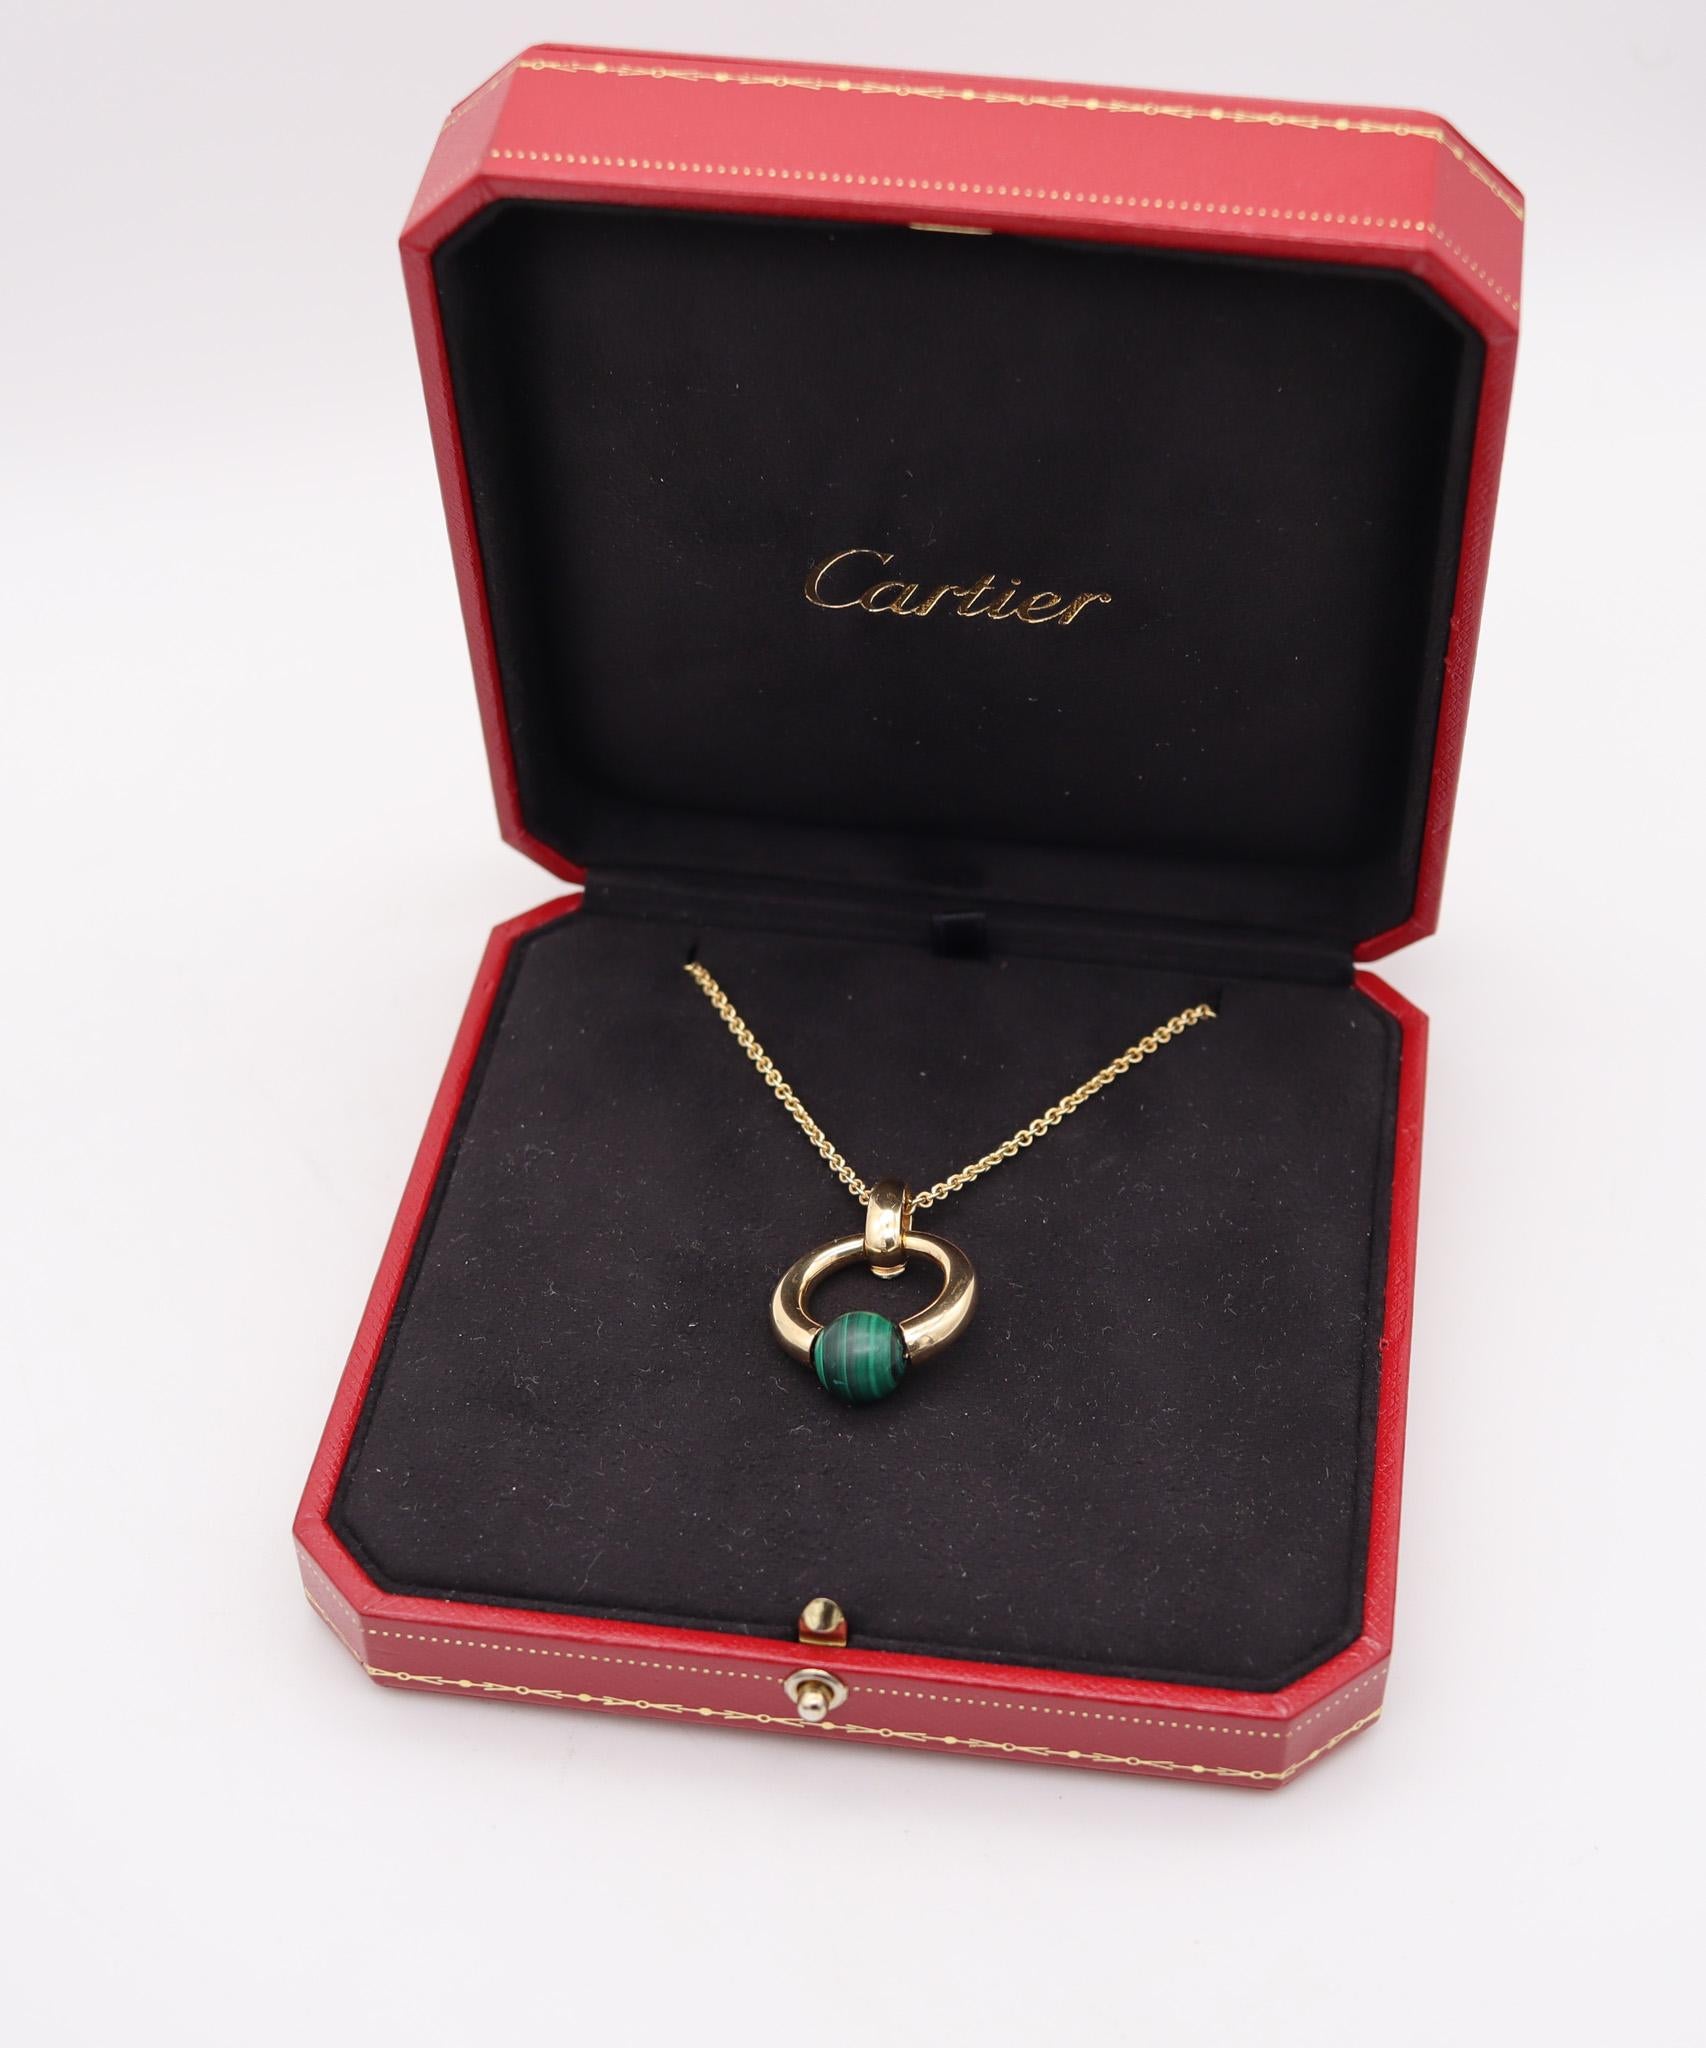 Cartier Paris 1994 Rare Necklace Pendant In 18Kt Yellow Gold With Malachite For Sale 2